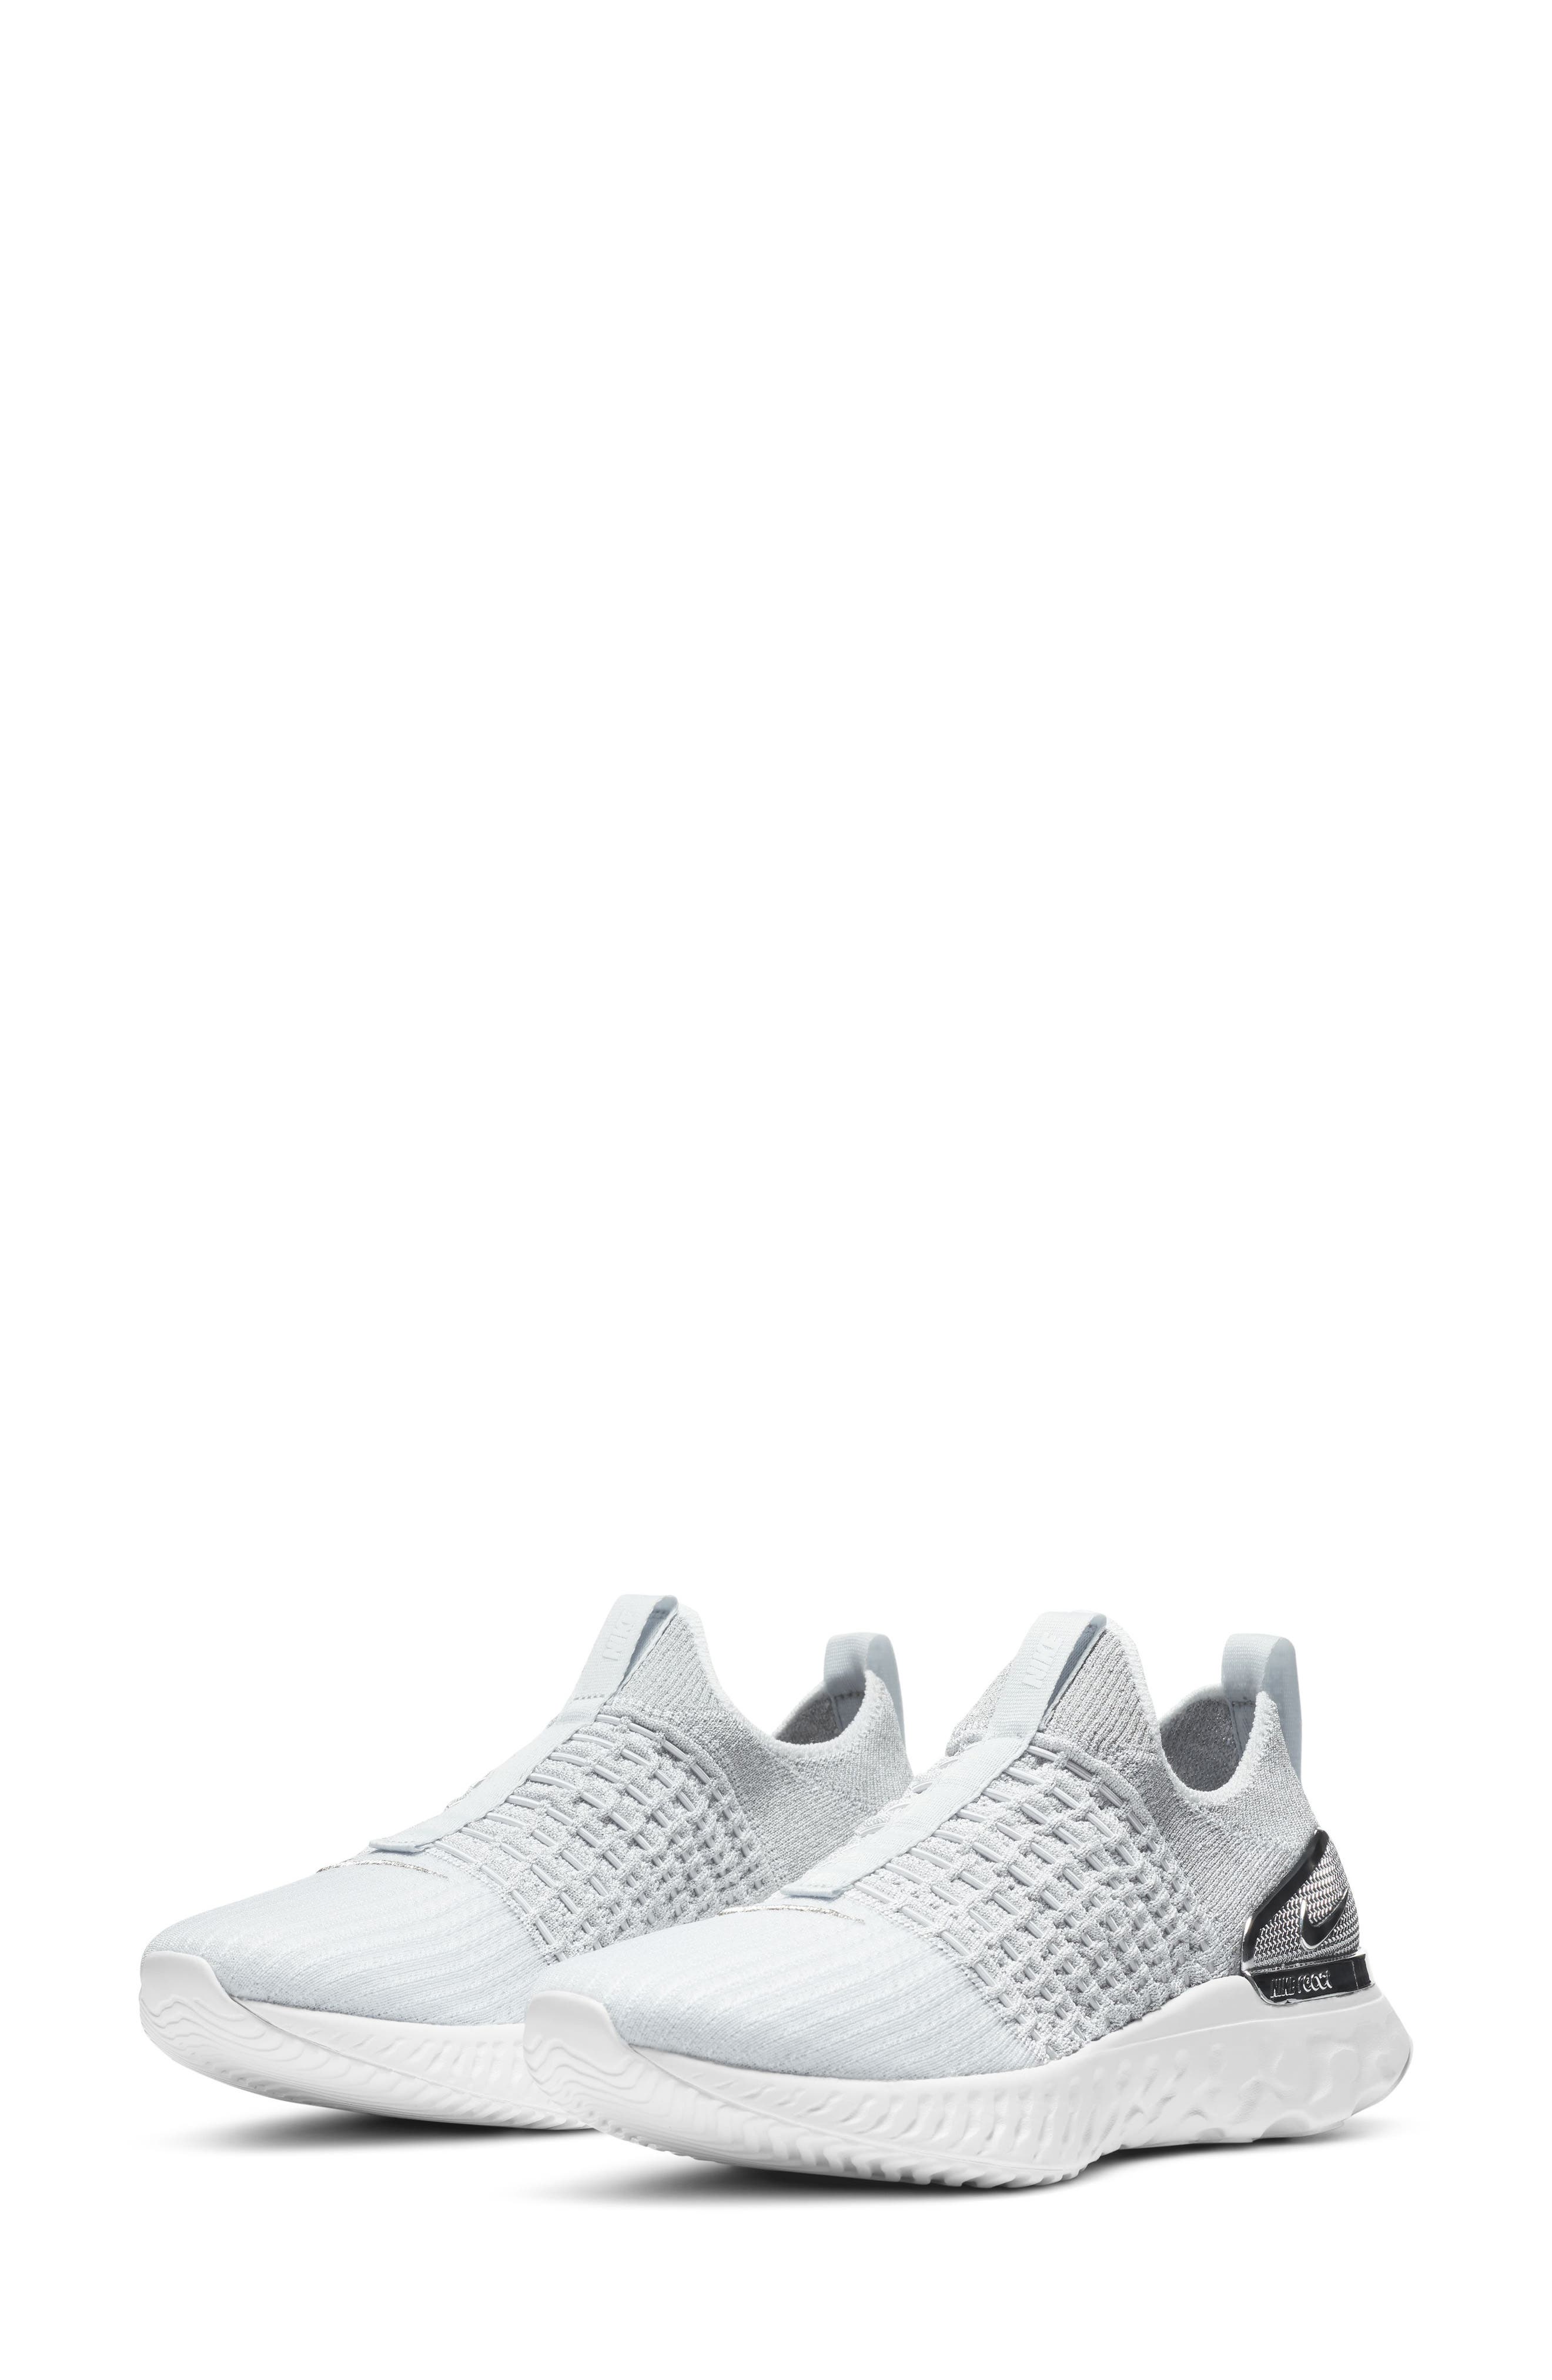 grey and white nike womens shoes